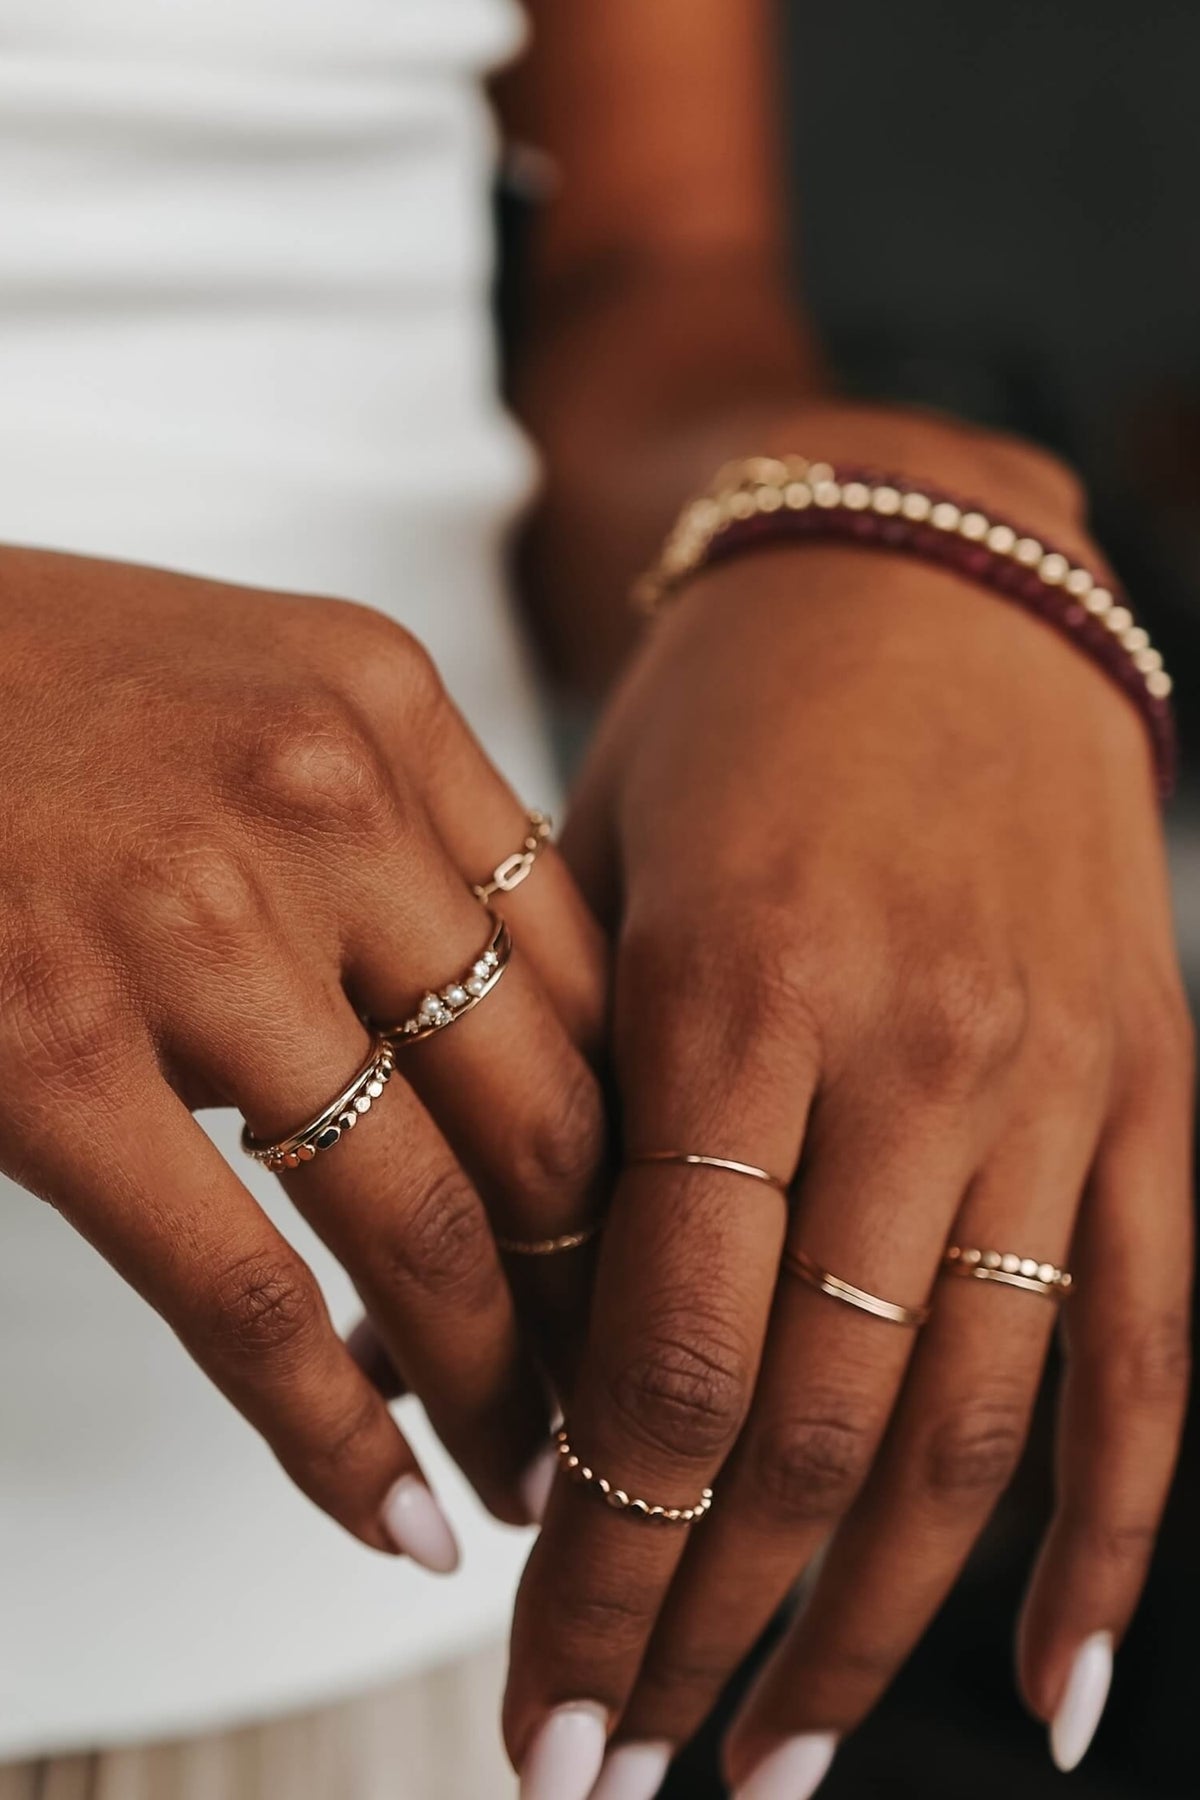 hands showing rings and bracelets